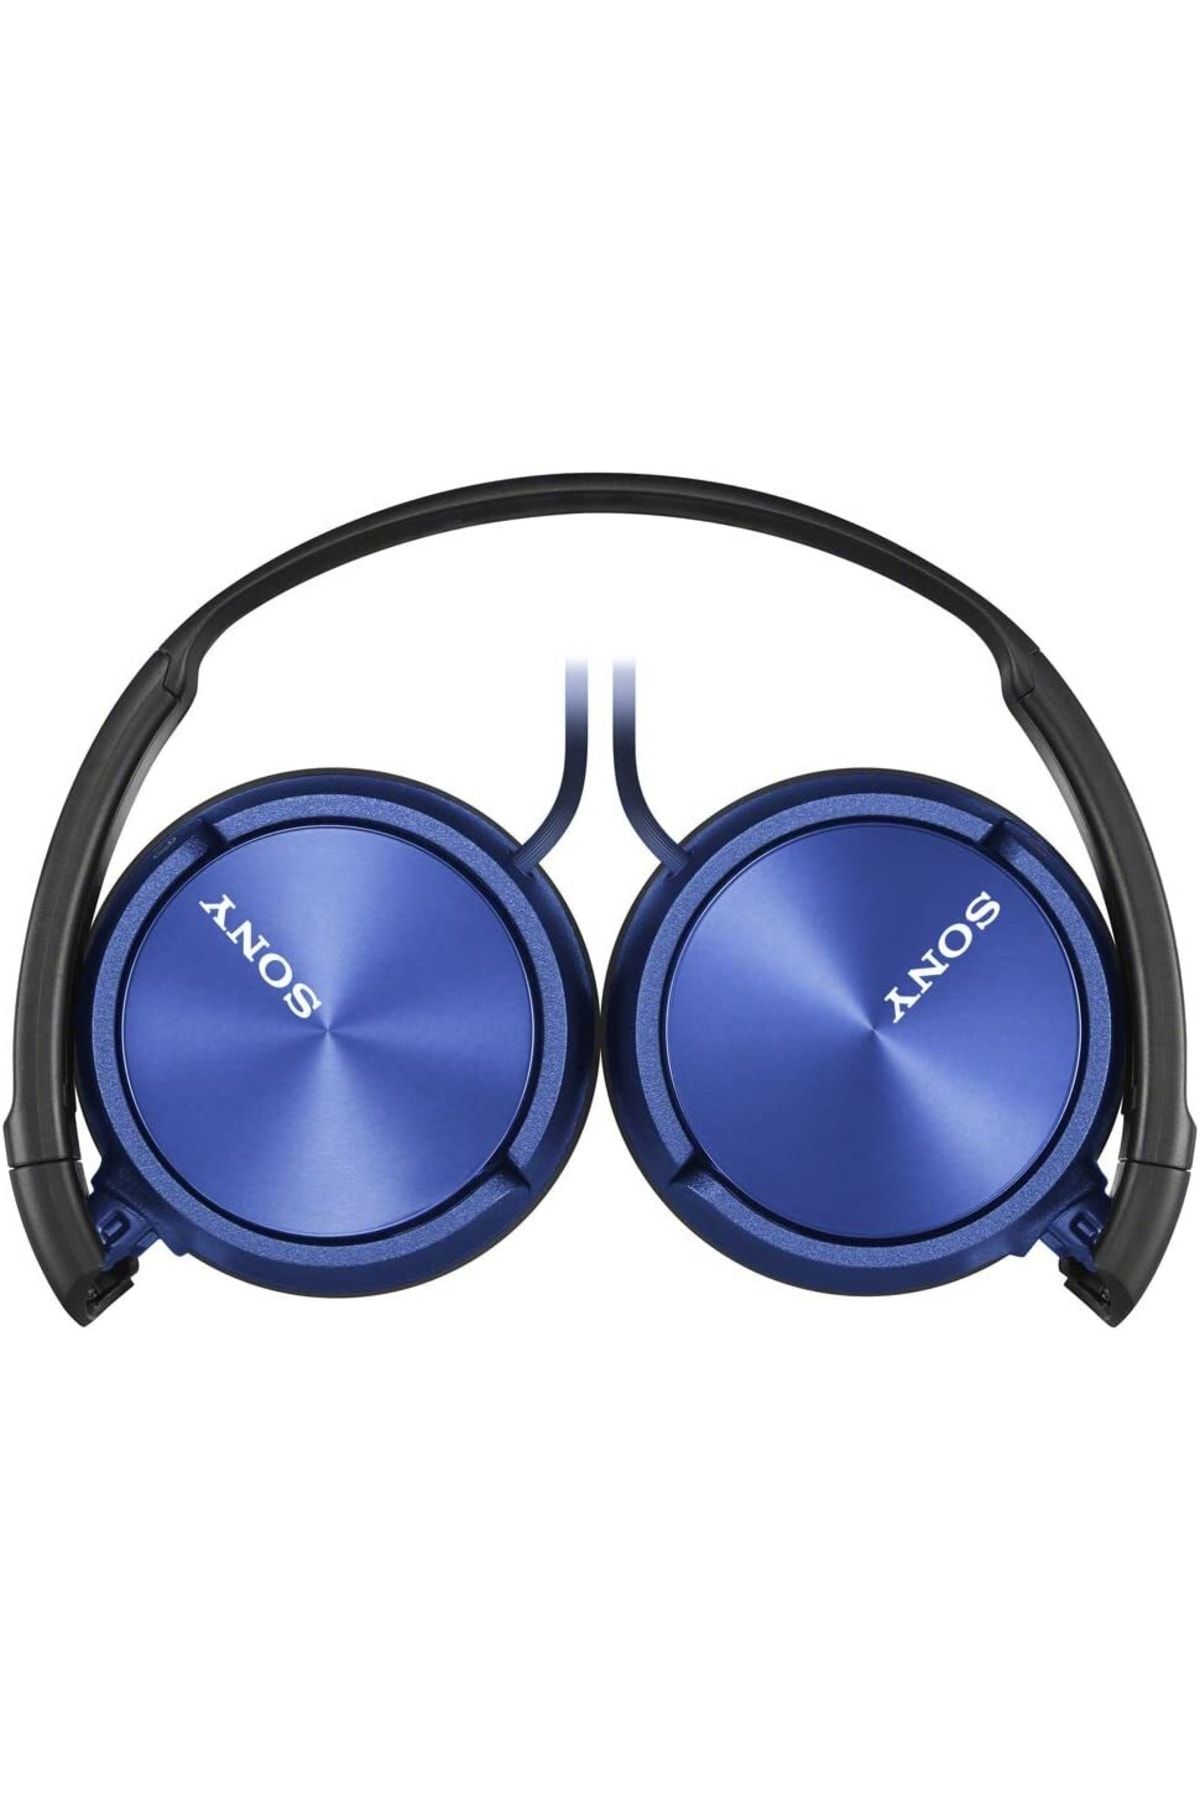 Sony mdr zx310ap. Sony MDR-zx310. Sony MDR-zx110. MDR-zx310. Наушники Sony MDR-zx110.